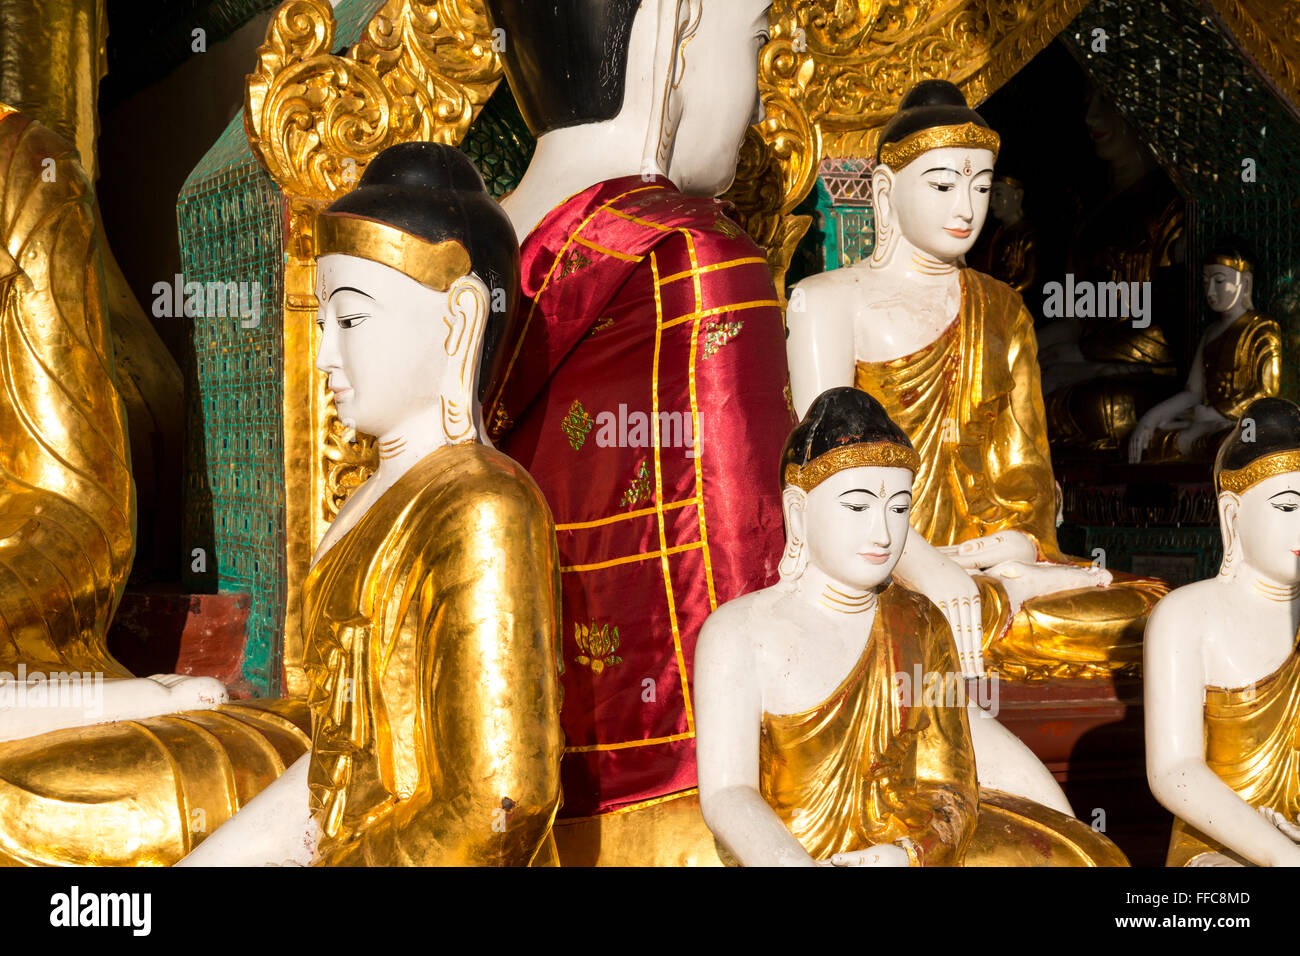 Close up of different sized golden Buddhas, one with a silky red cloak at the Shwedagon pagoda in Yangon Stock Photo